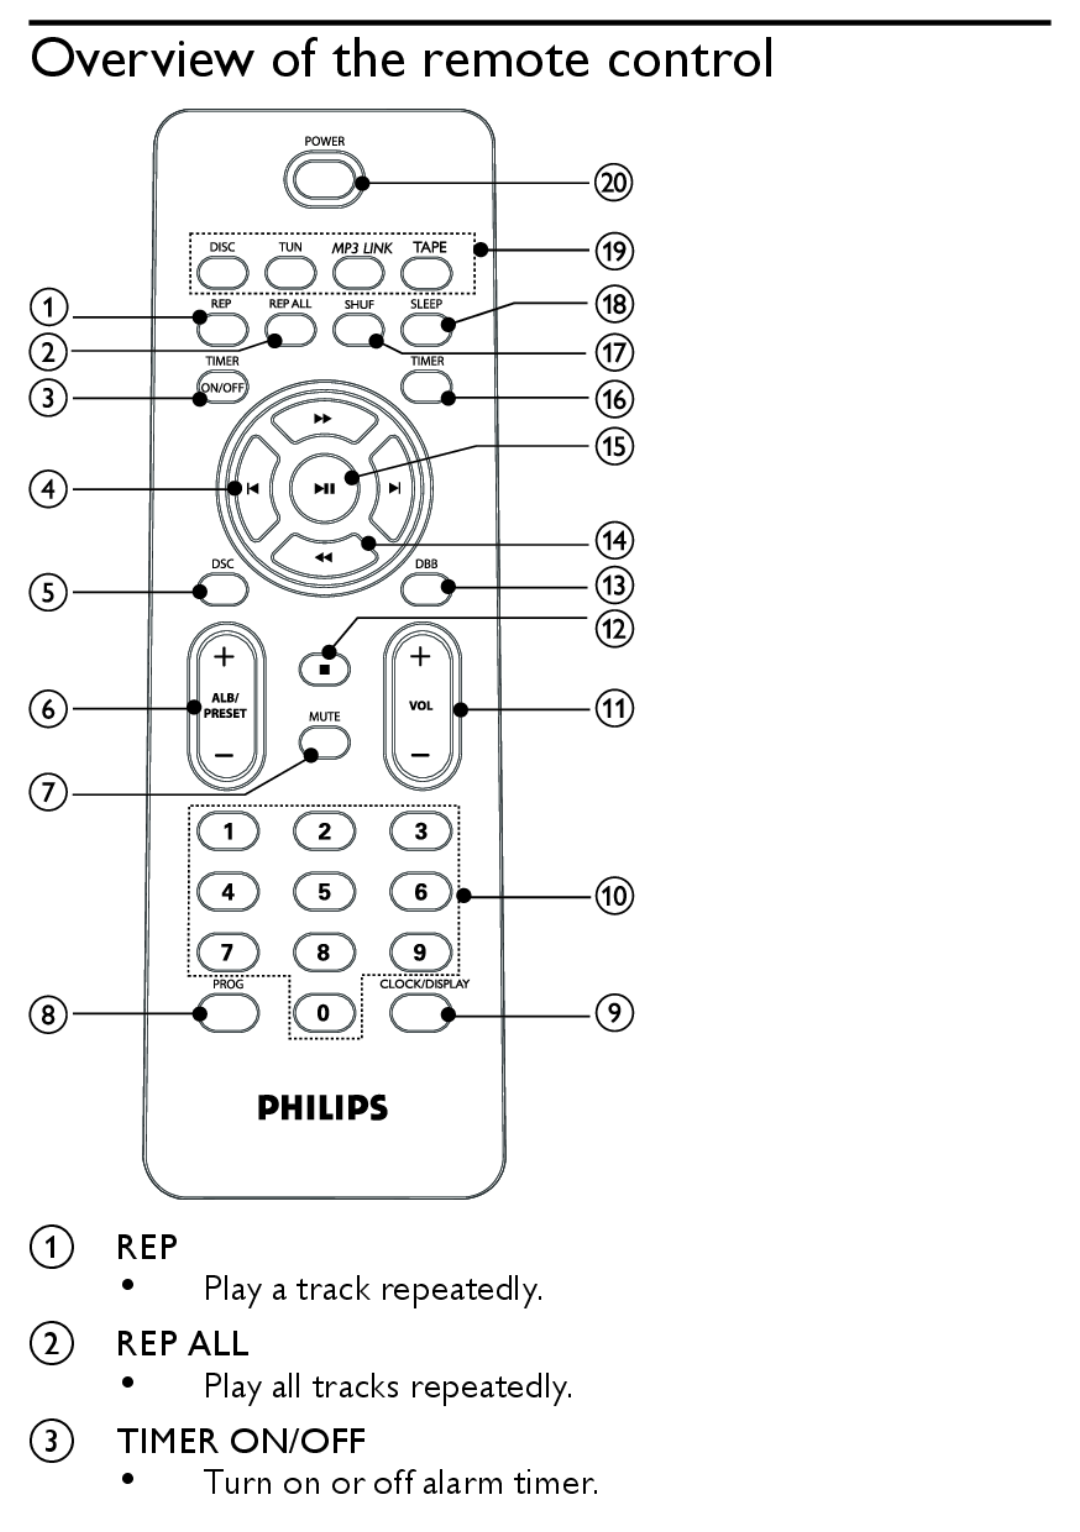 Philips MCM167 Overview of the remote control, AREP Play a track repeatedly BREP ALL, Turn on or off alarm timer 